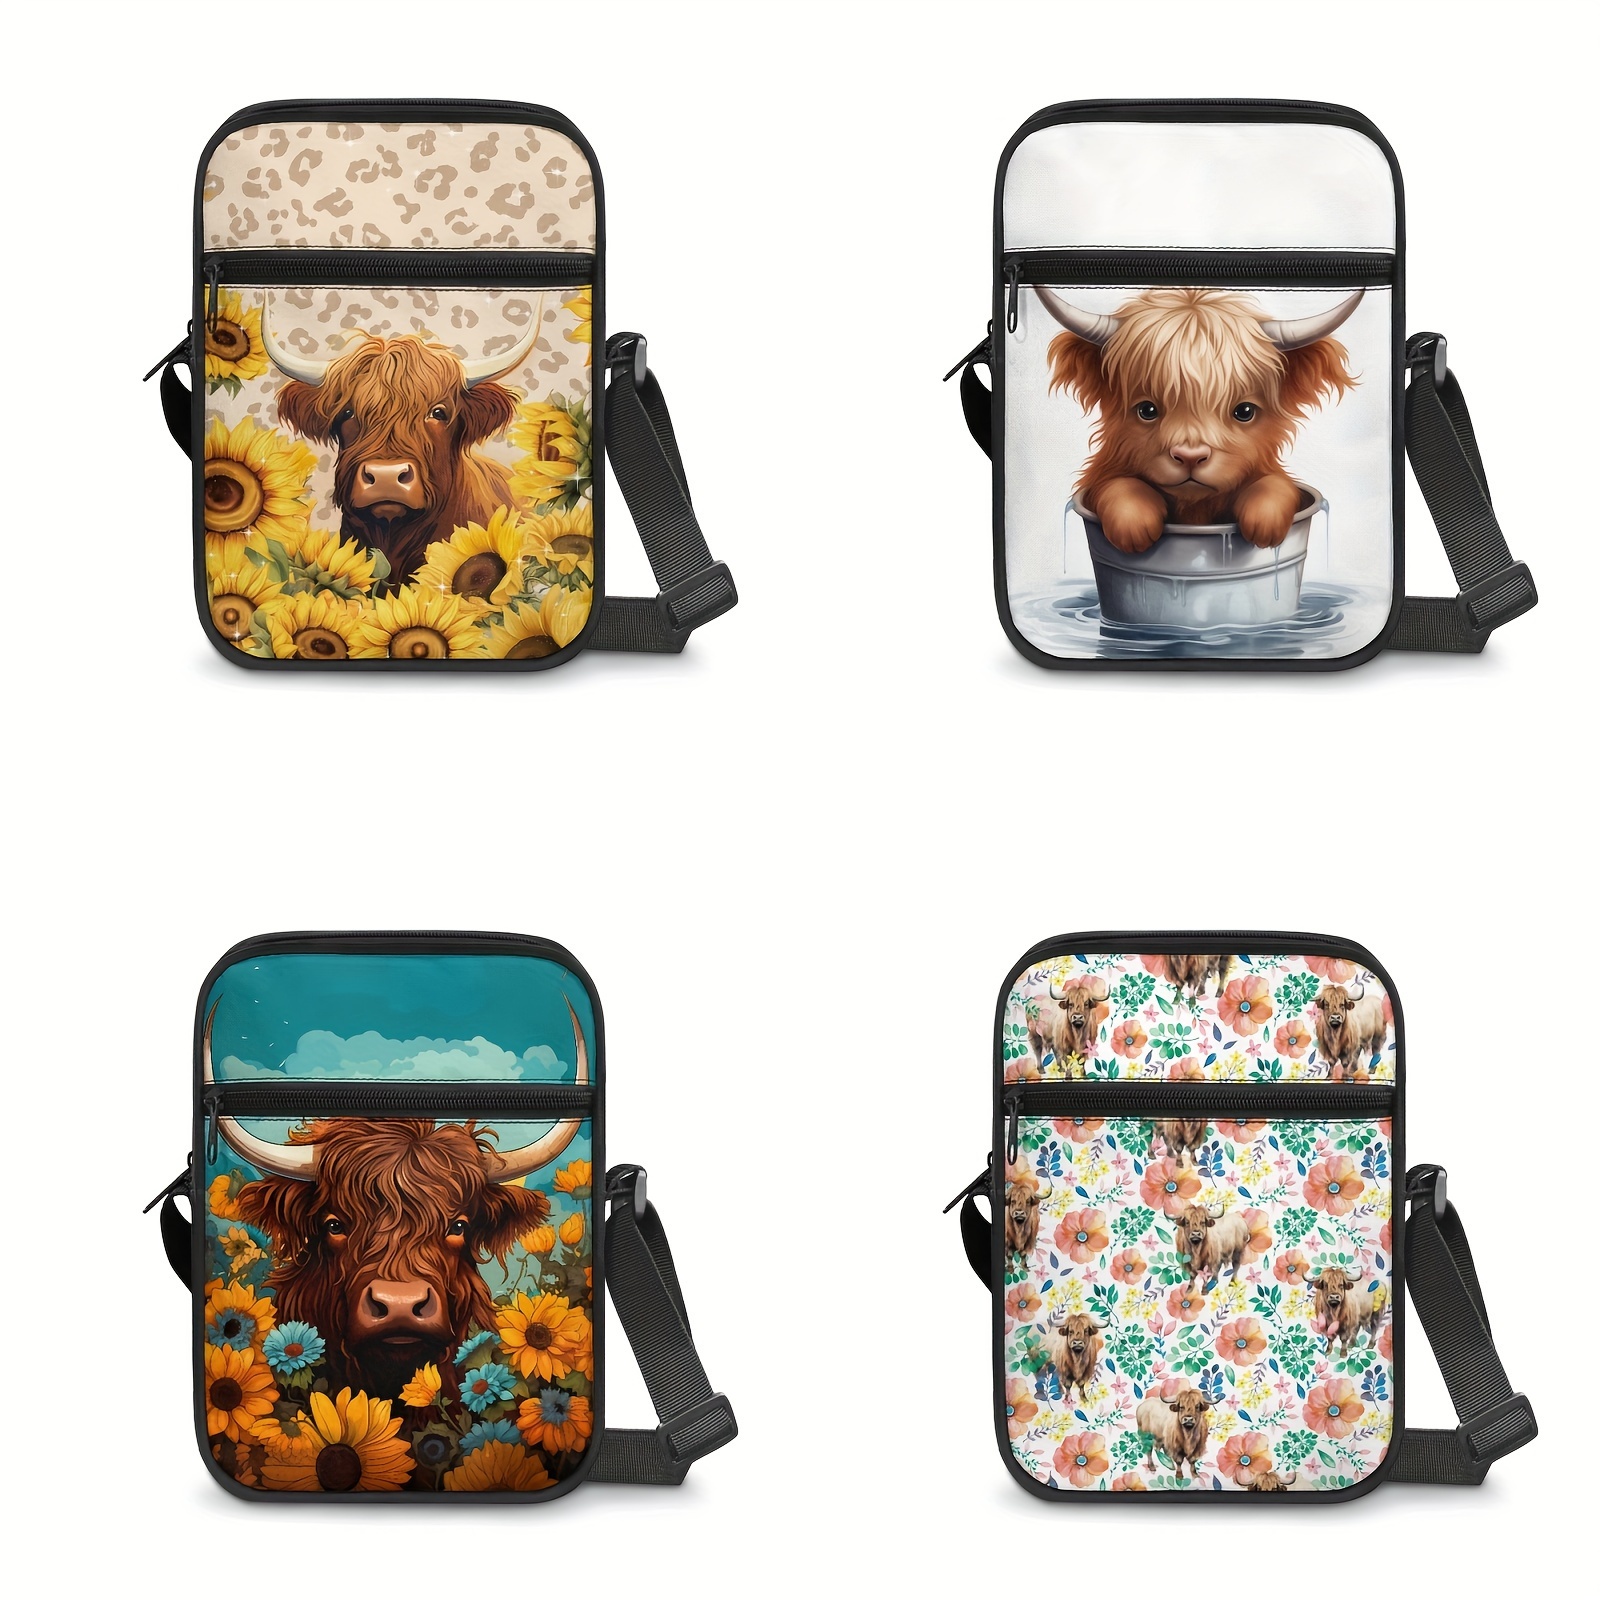 

Highland Cow Print Messenger Bag With Adjustable Strap, Double Layer Shoulder Bag, Ideal For Daily Use